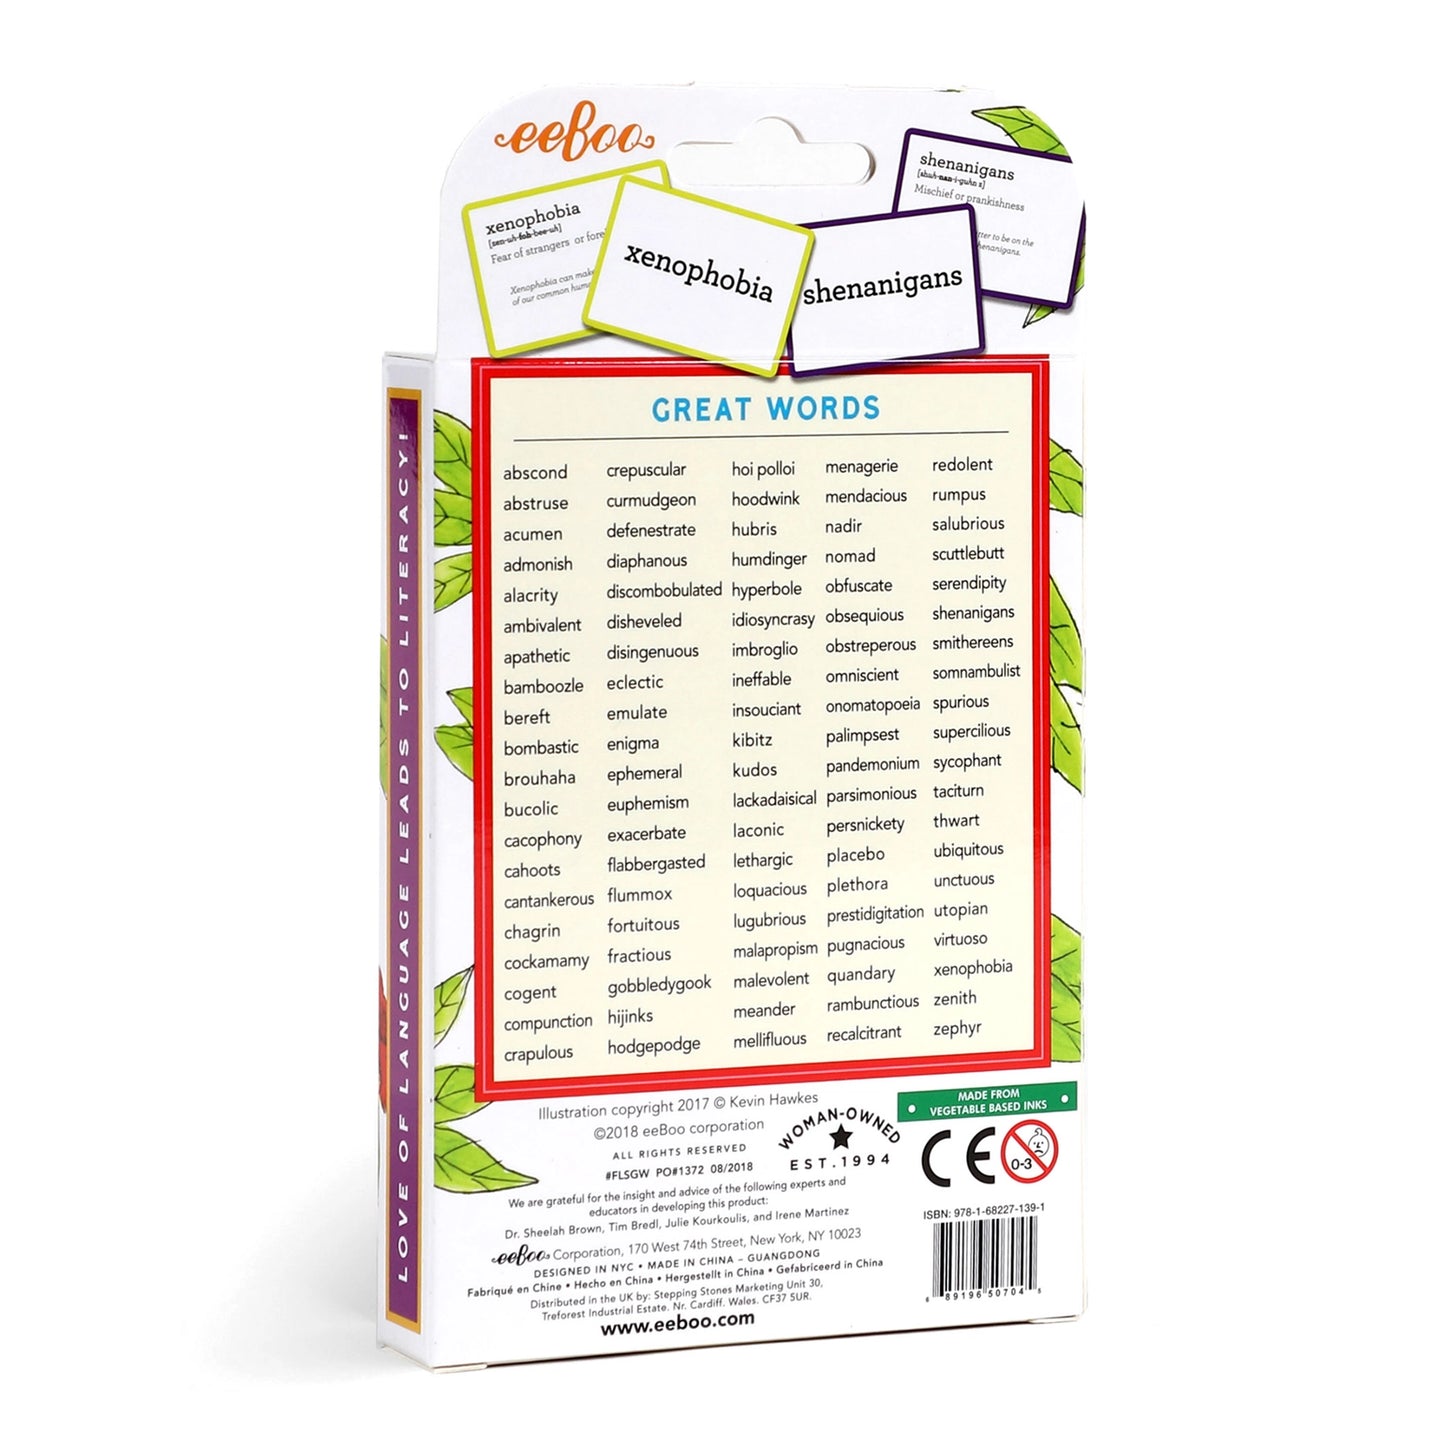 100 Great Words Flashcards